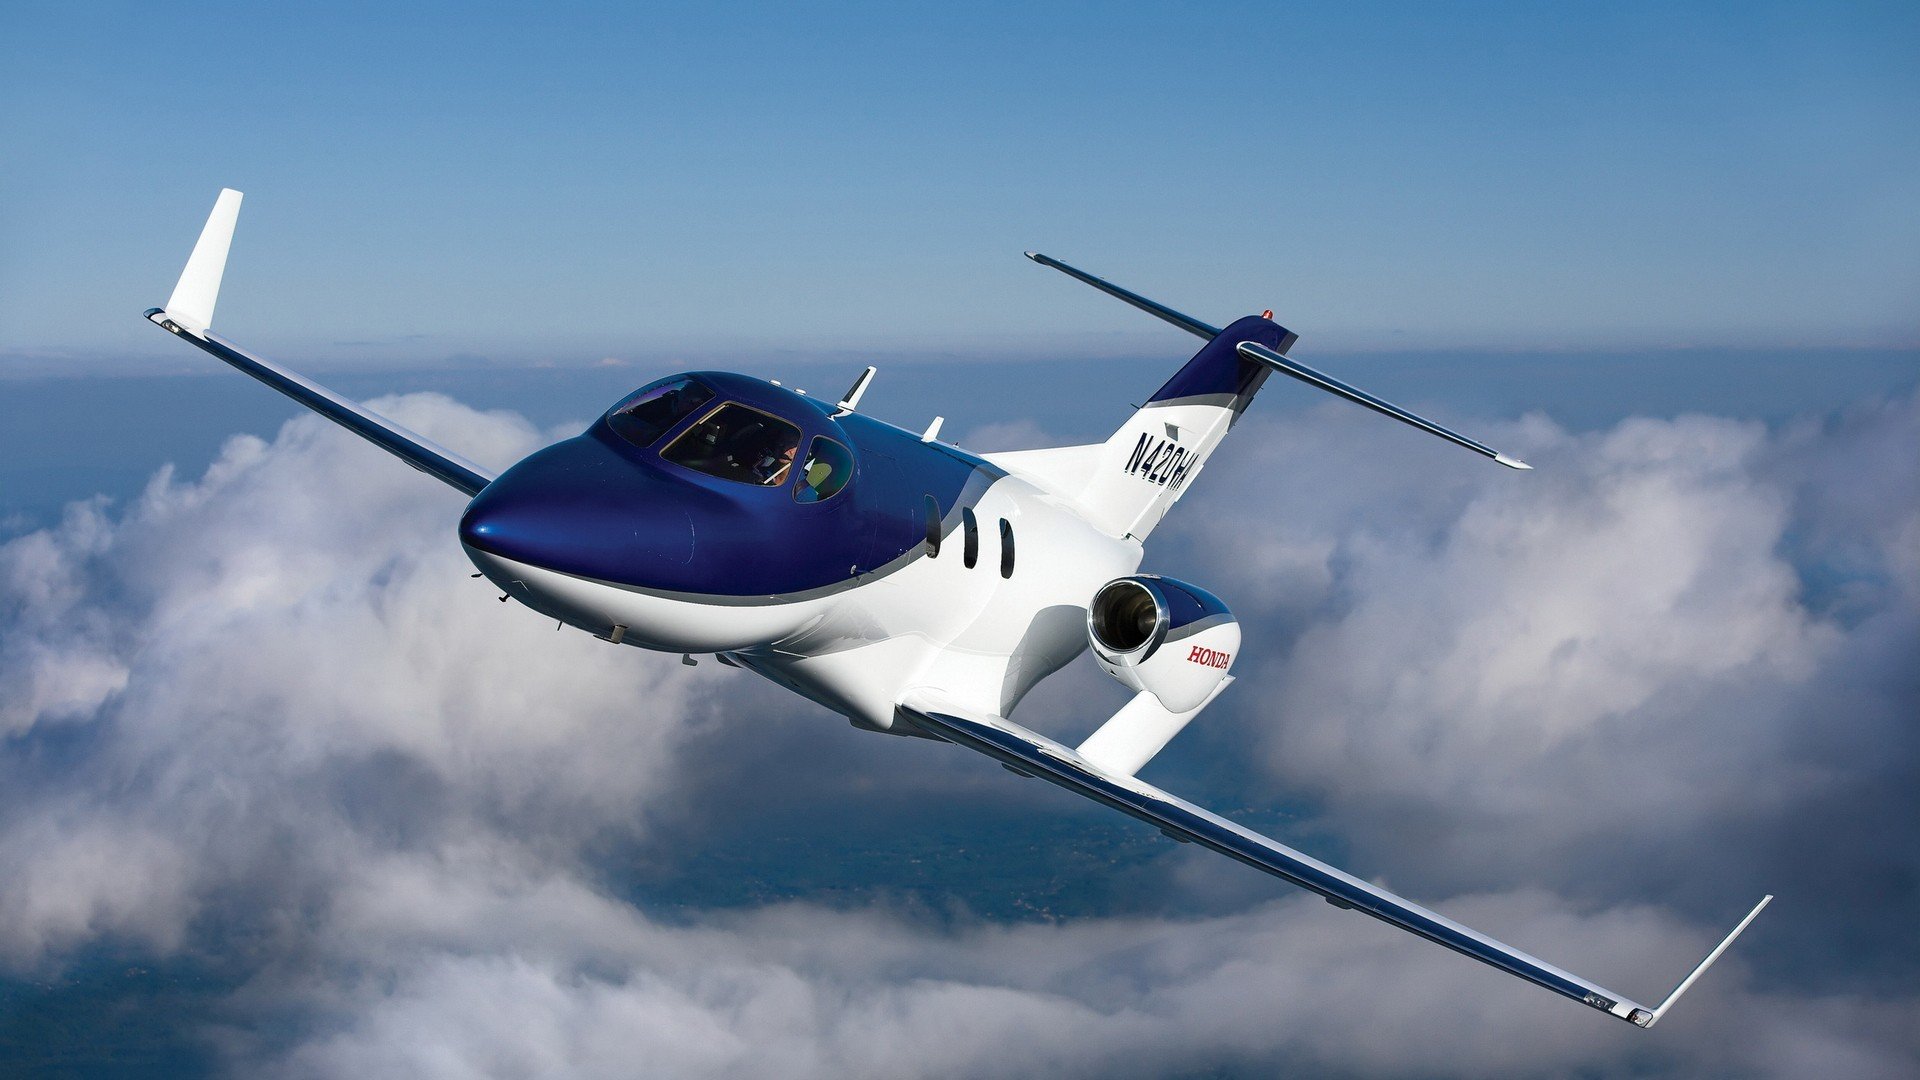 clouds, Aircraft, Flying, Skyscapes, Hondajet Wallpaper